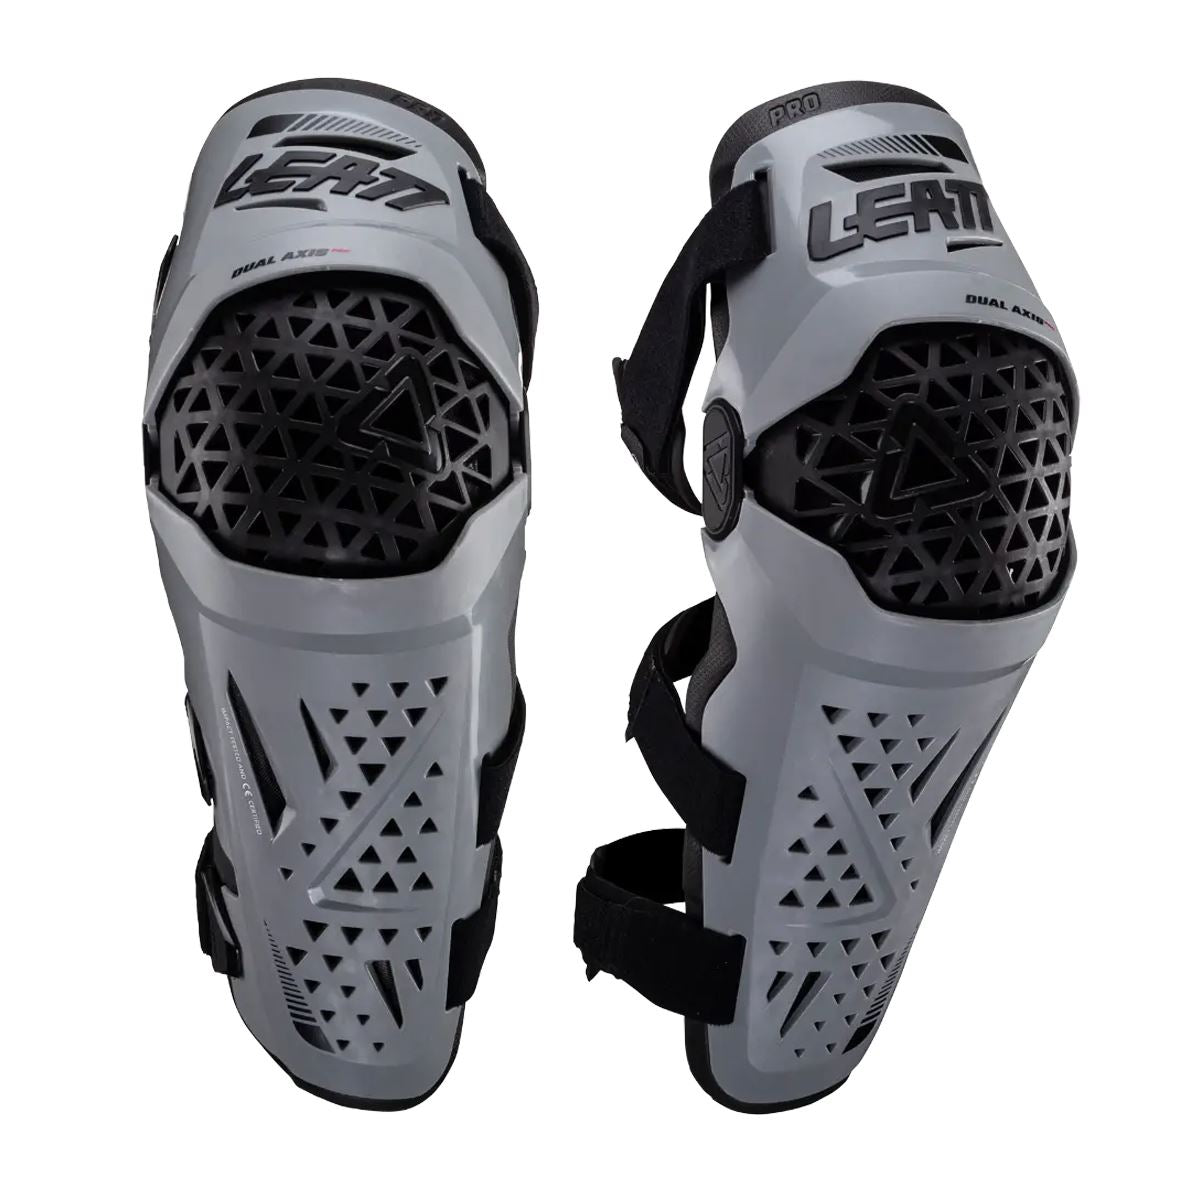 Leatt 2024 Dual Axis Pro Knee Guards Forge